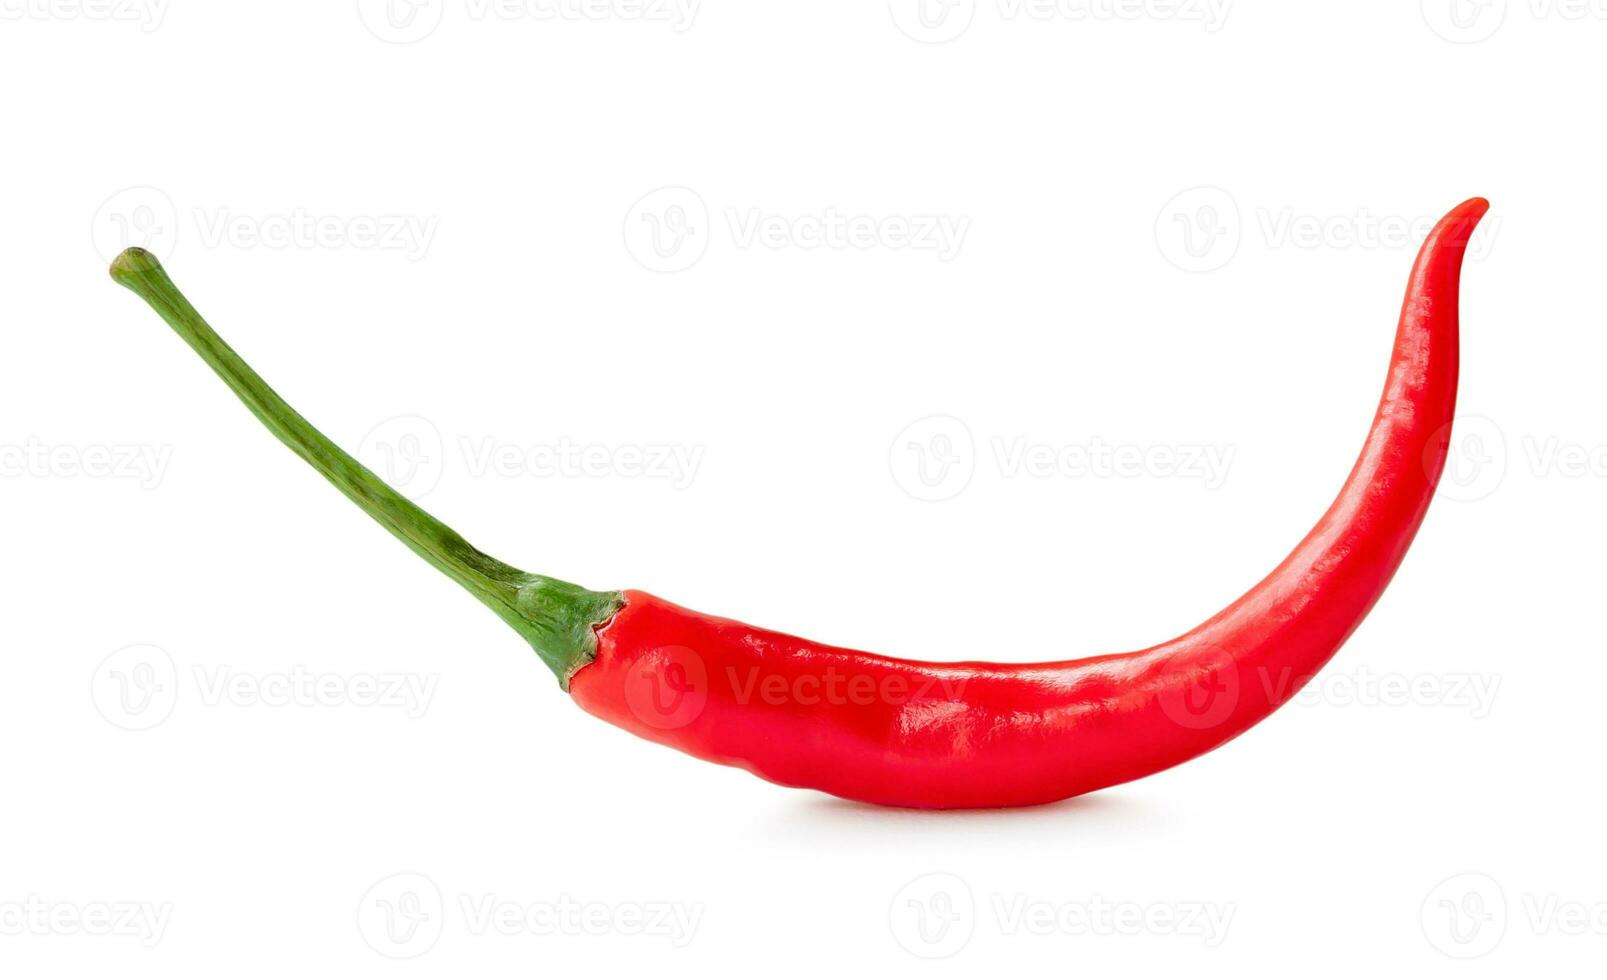 Single fresh red chili pepper isolated on white background with clipping path. Front view and flat lay of curved red chili photo